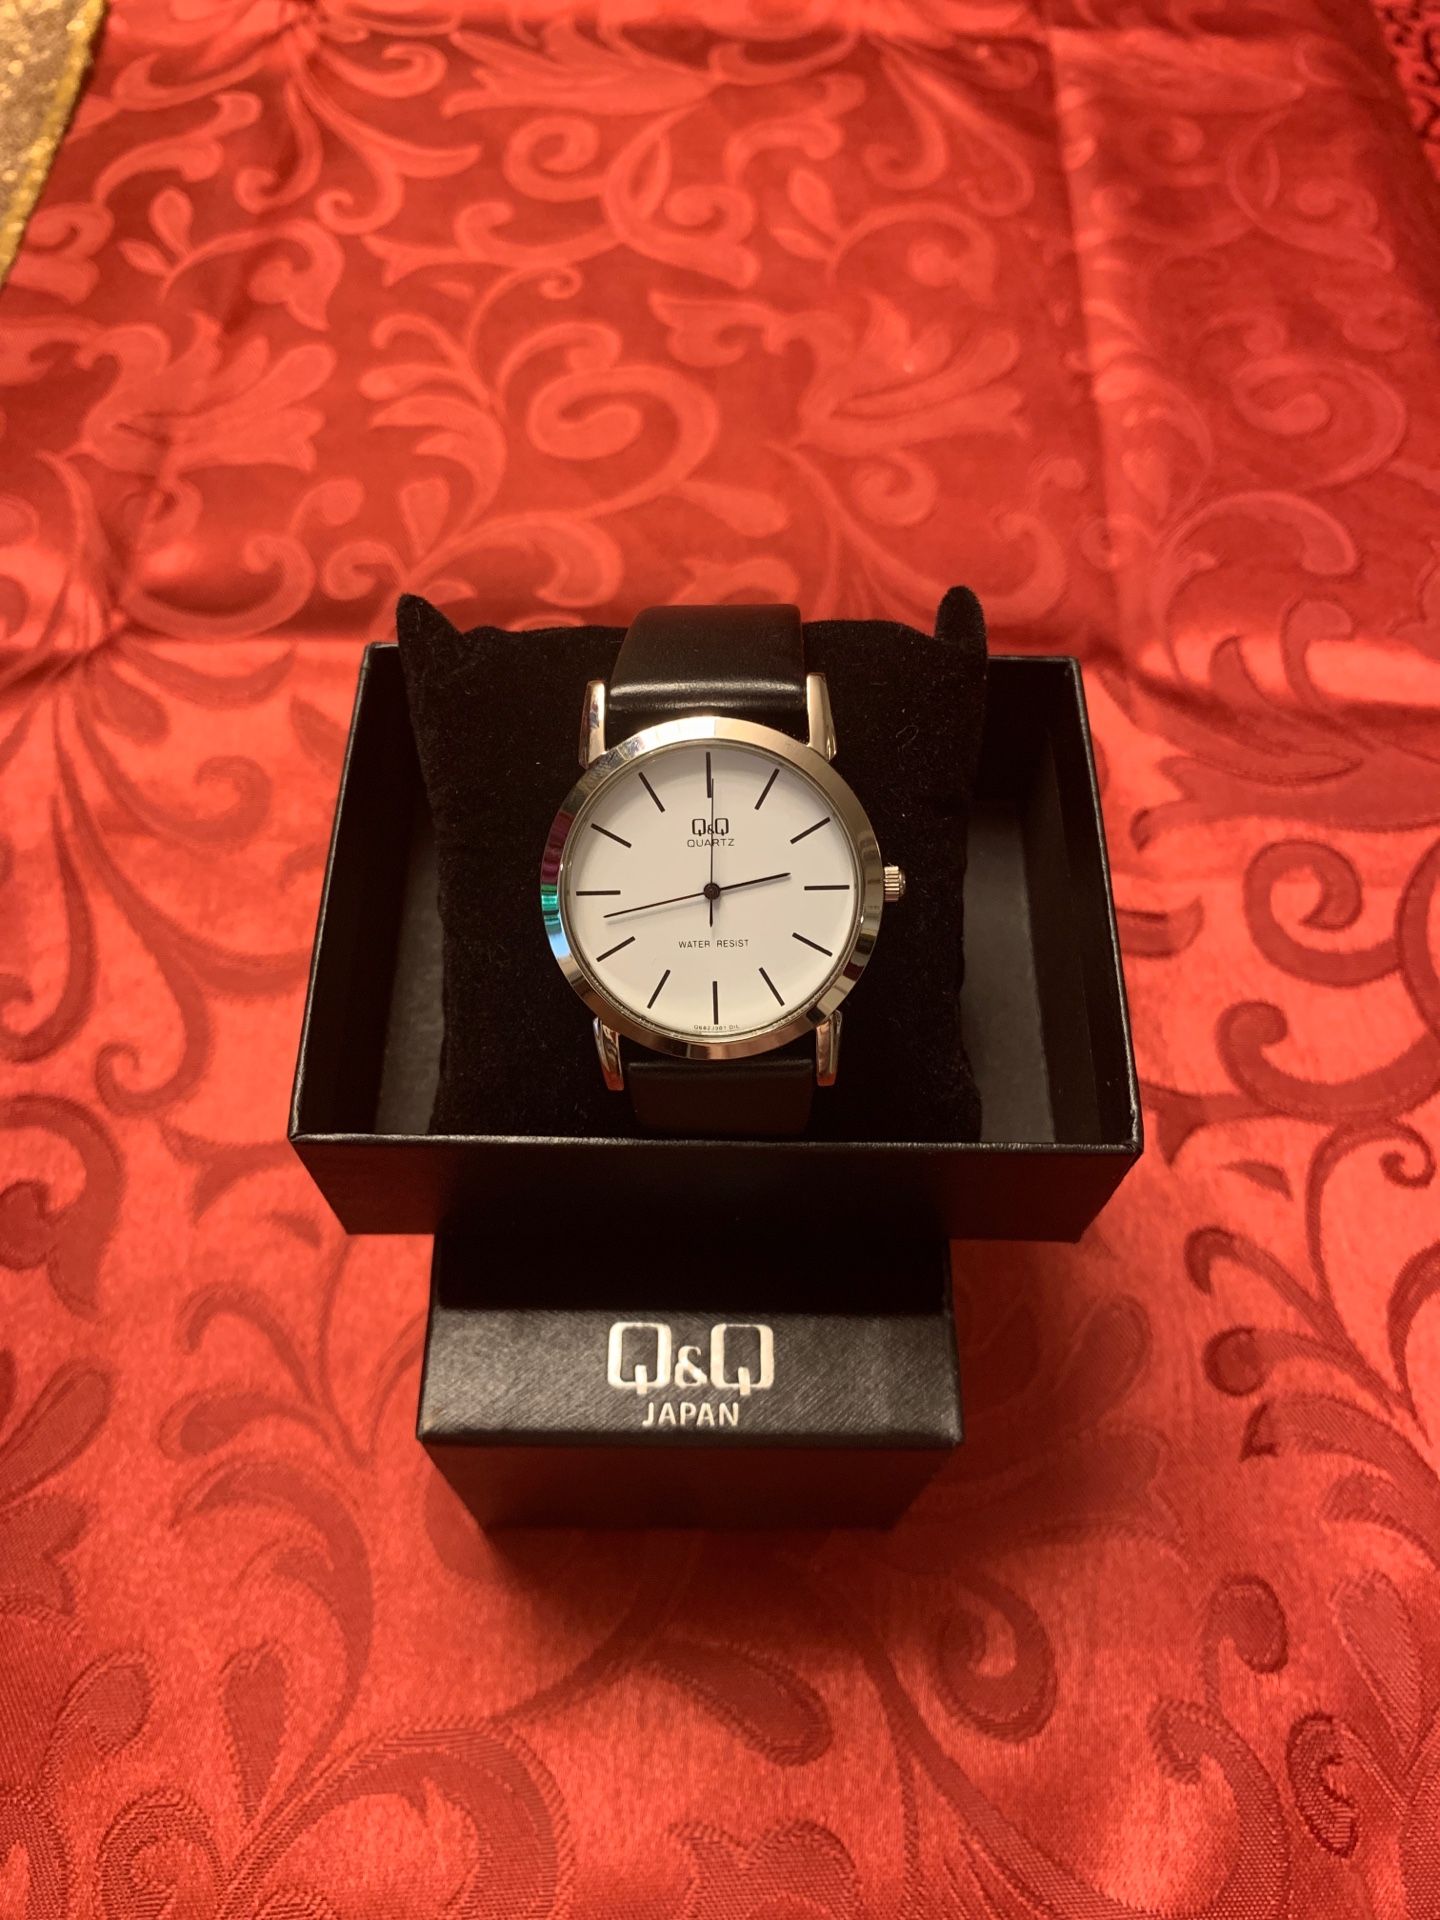 NEW in box - Unisex watch by Q and Q Japan